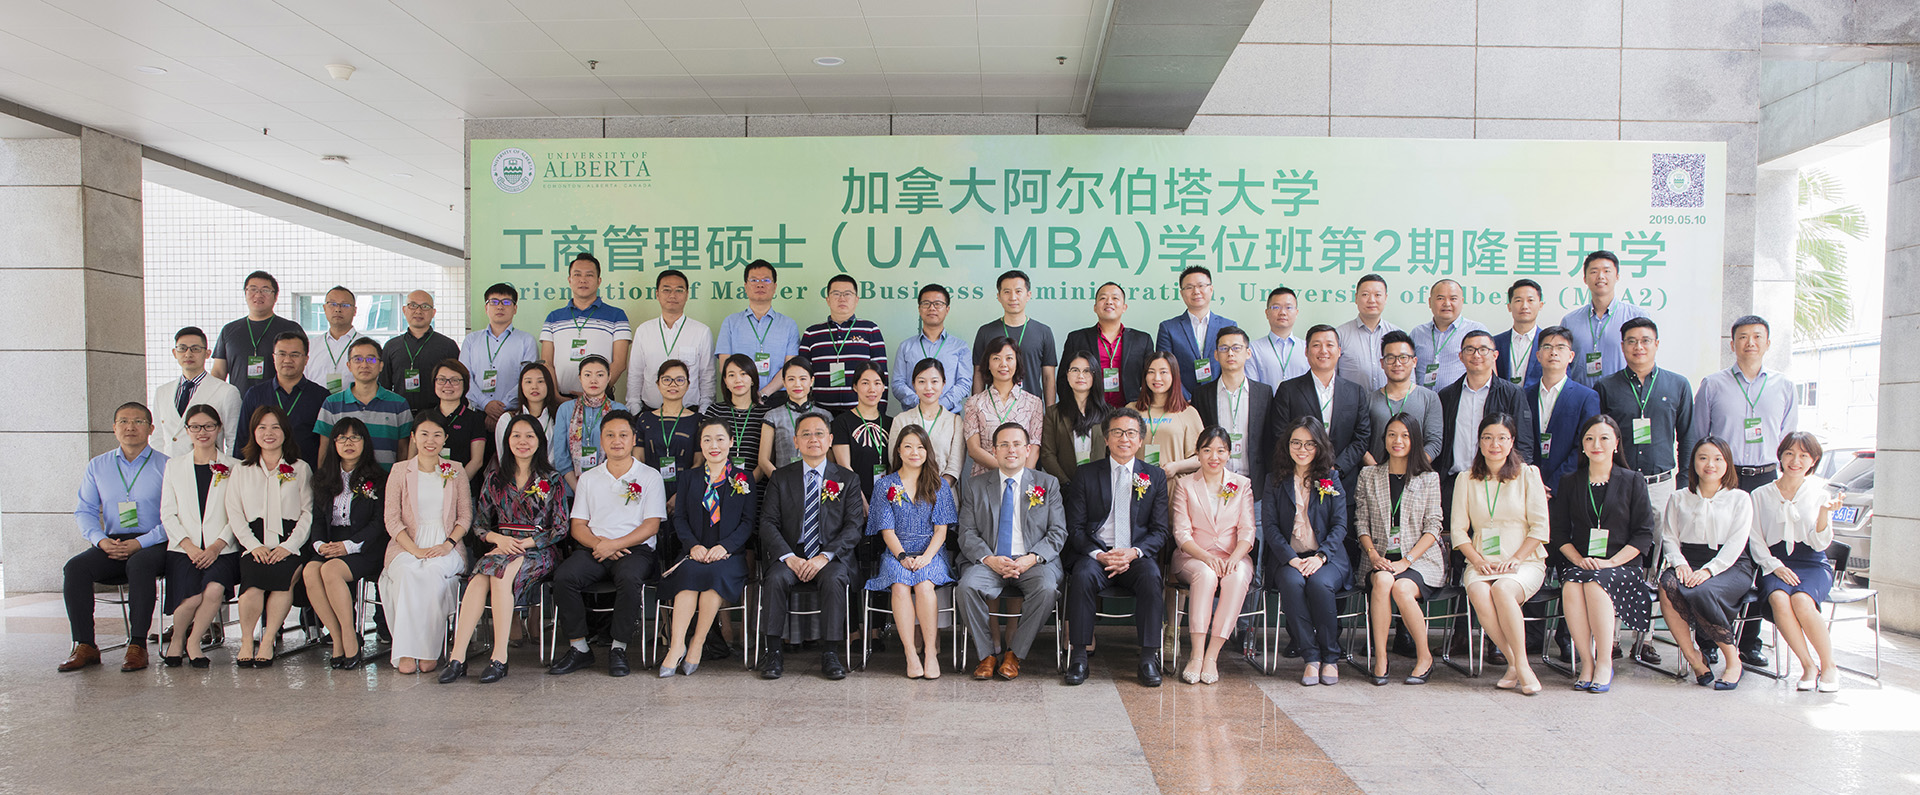 A group of our Shenzhen MBA students during the program opening.